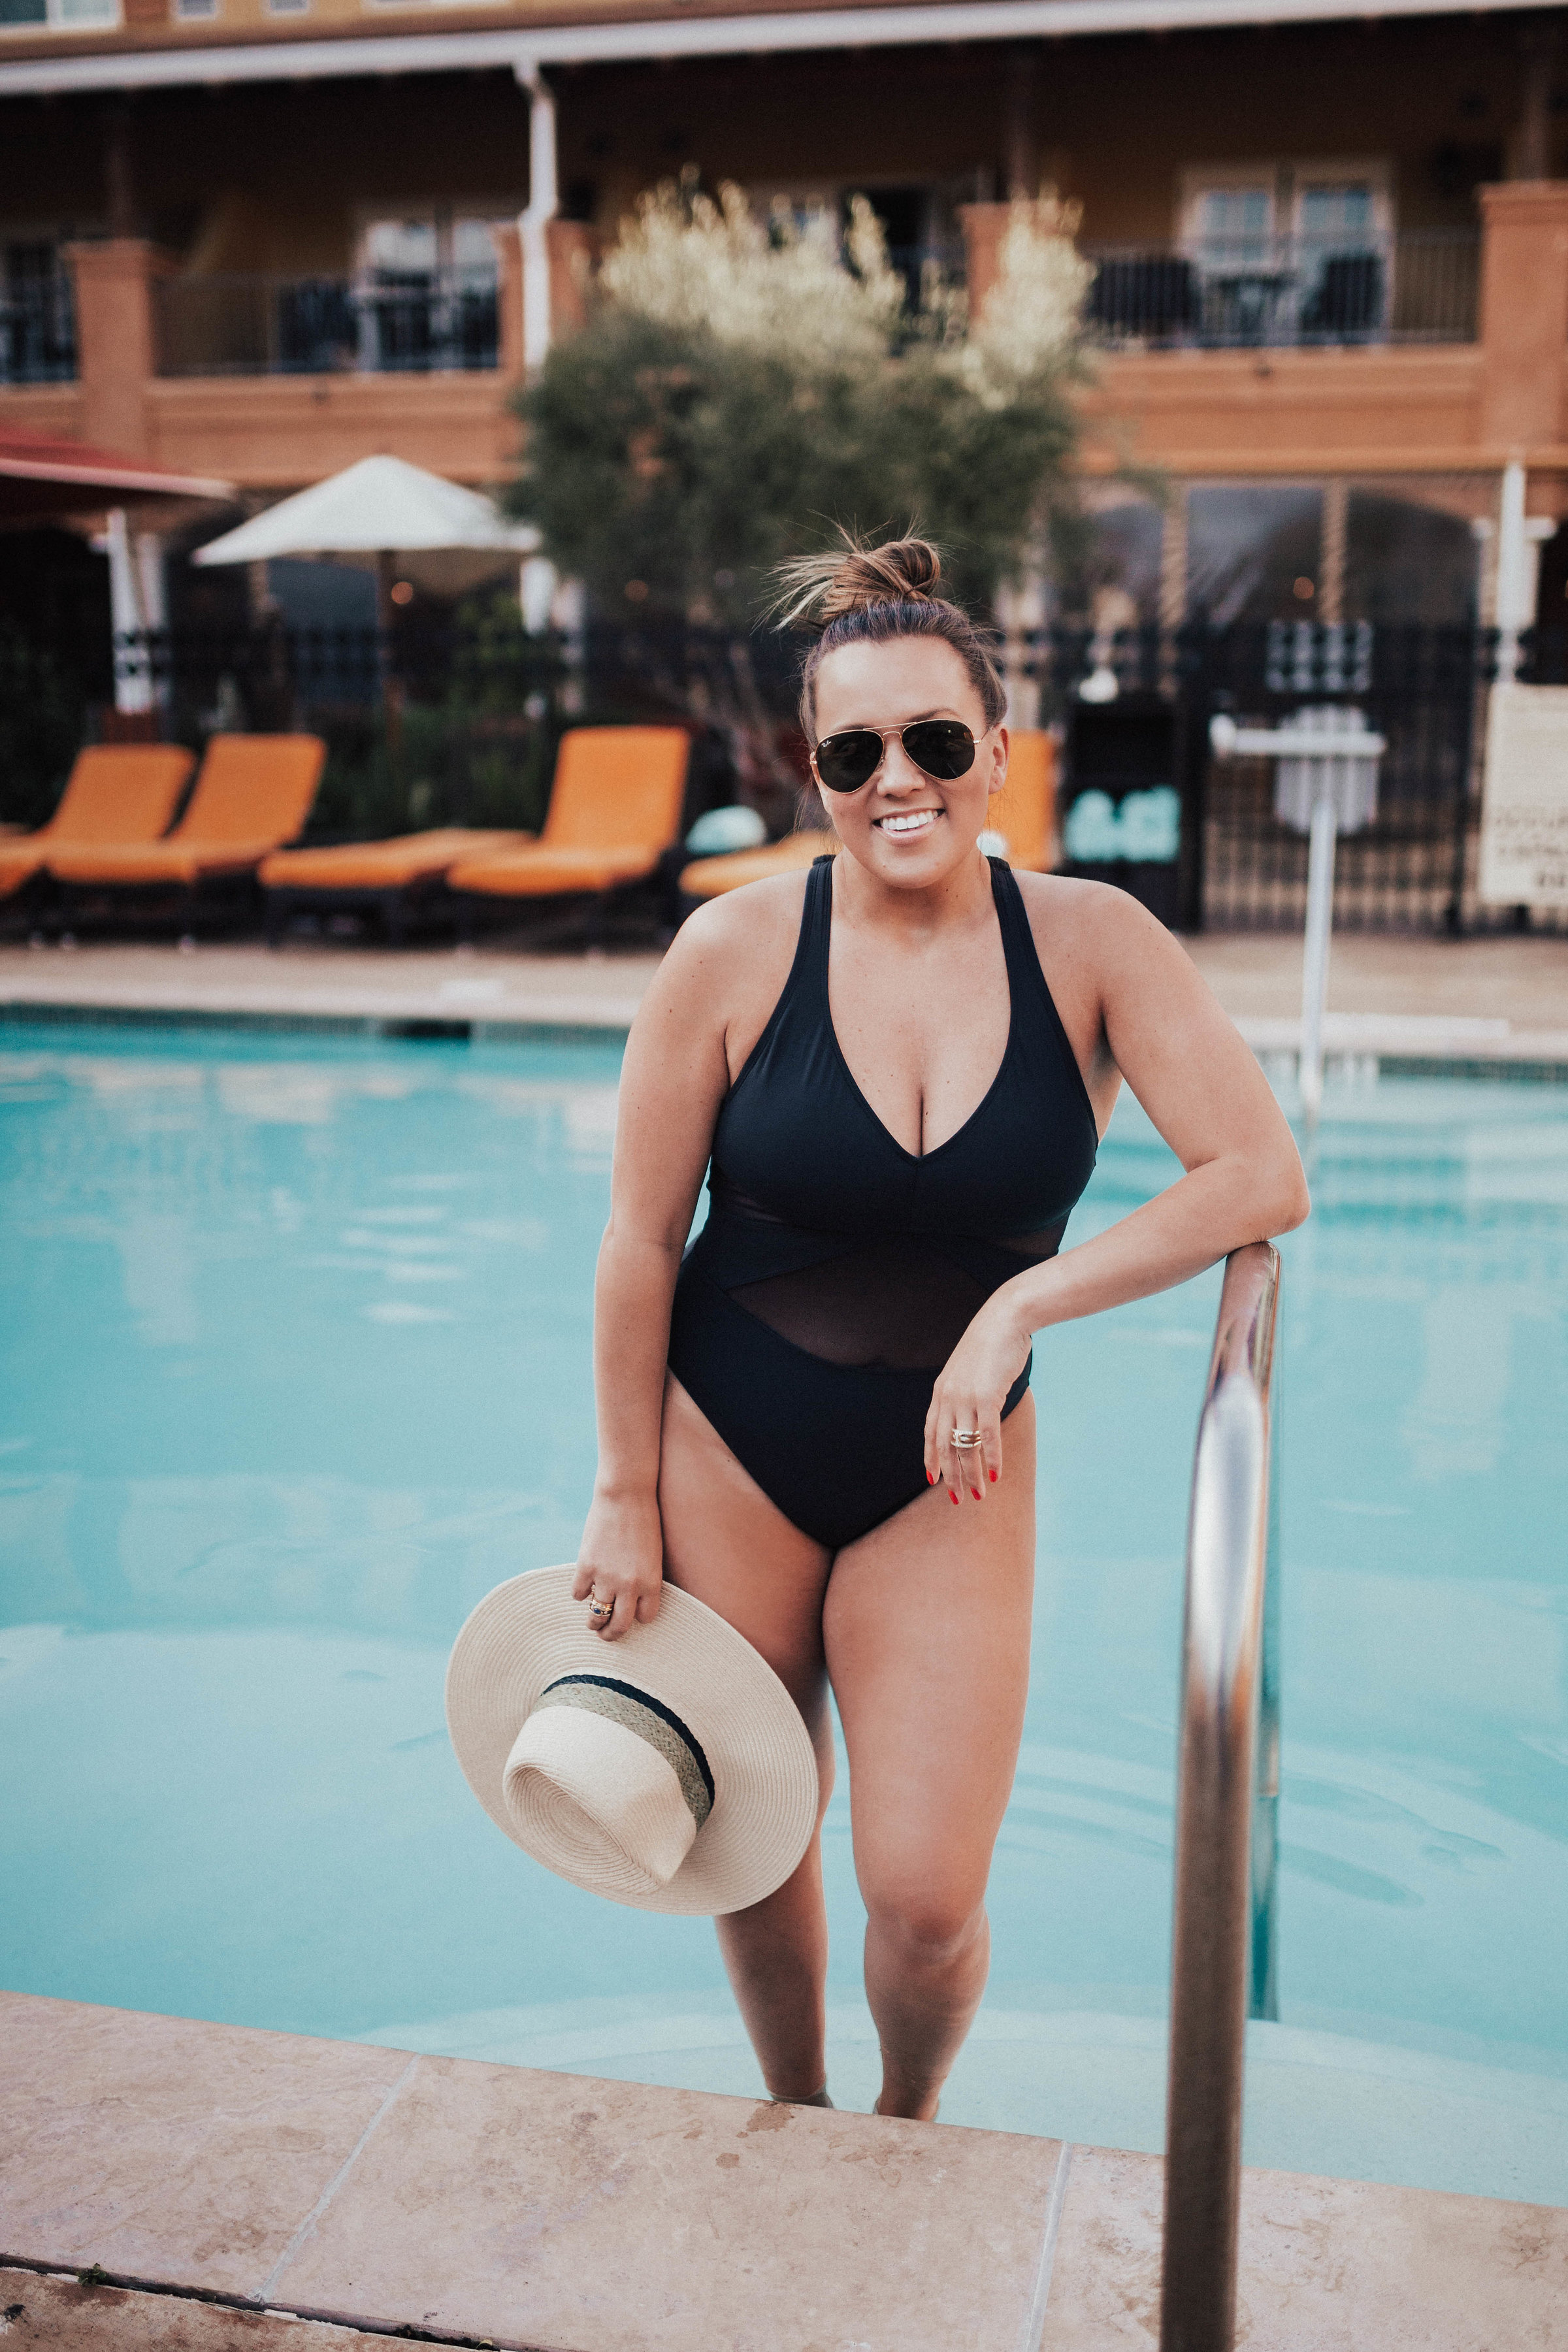 Ashley Zeal from Two Peas in a Prada shares what's in her beach bag, including: sunscreen, lip balm, sunnies and sun hats! She is wearing Bleu by Rod Beattie. 